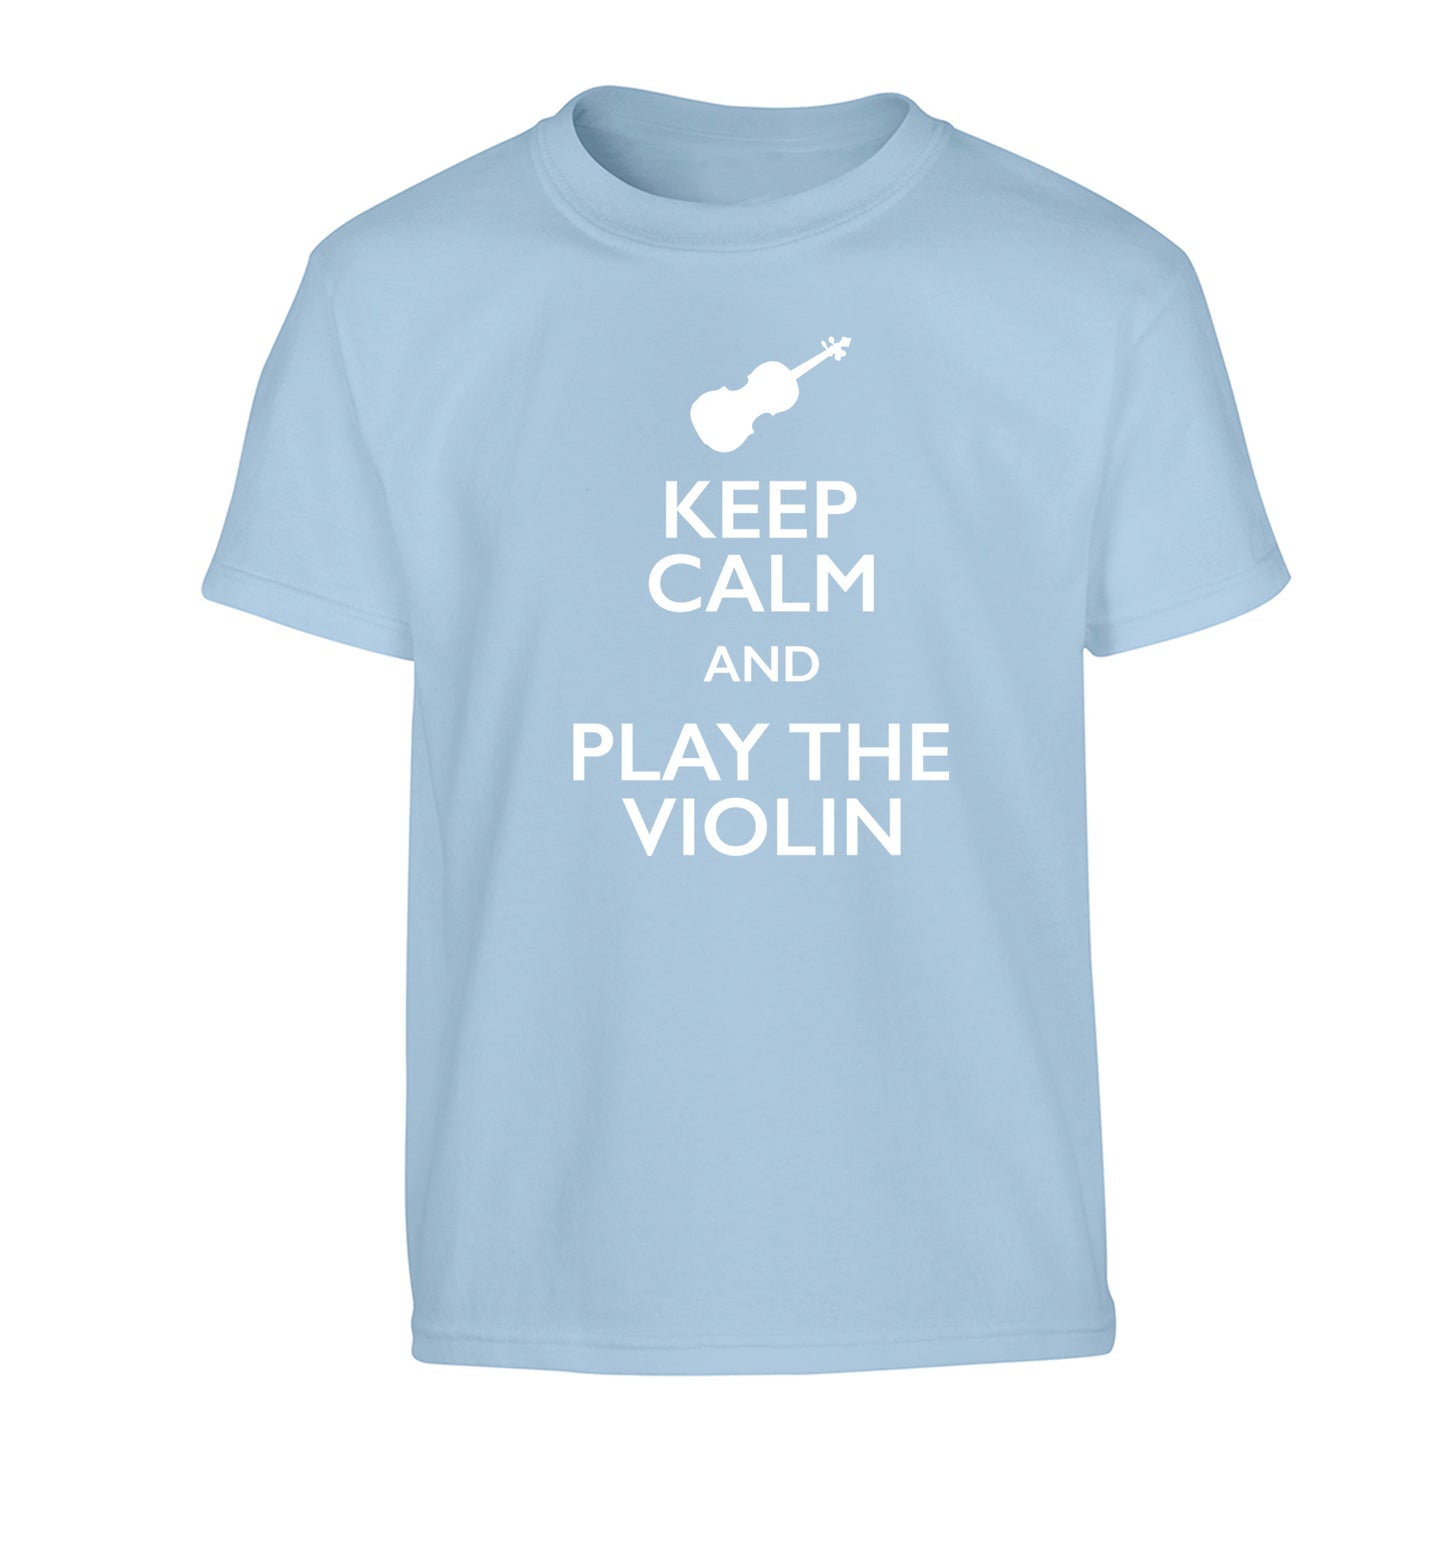 Keep calm and play the violin Children's light blue Tshirt 12-13 Years